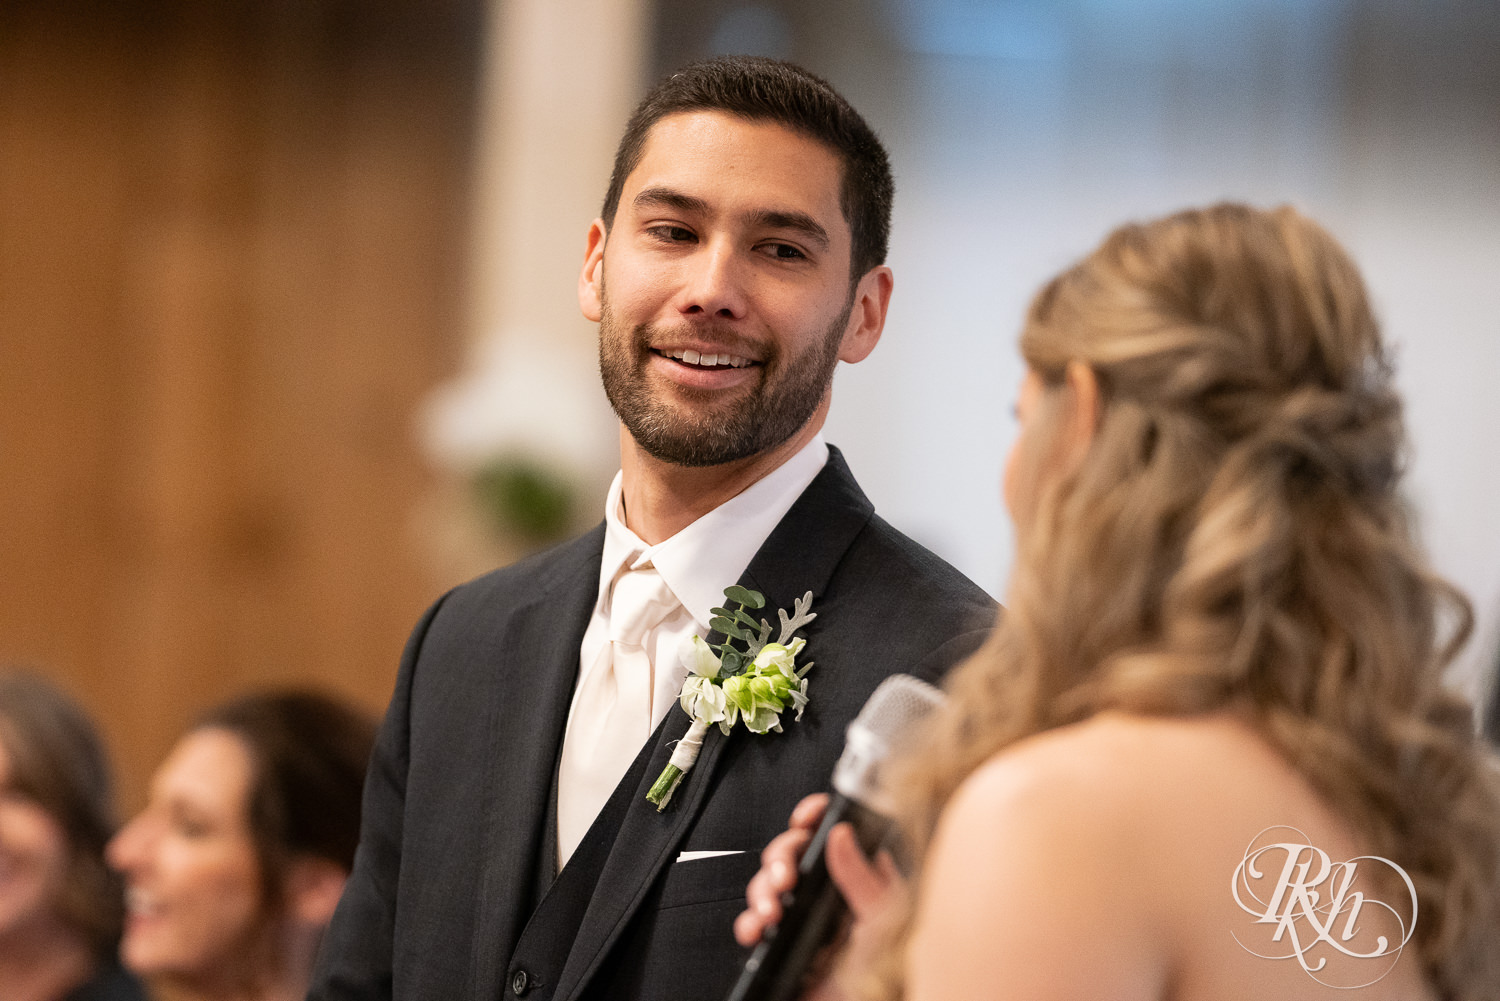 Bride and groom smile during speeches at wedding reception at Almquist Farm in Hastings, Minnesota.